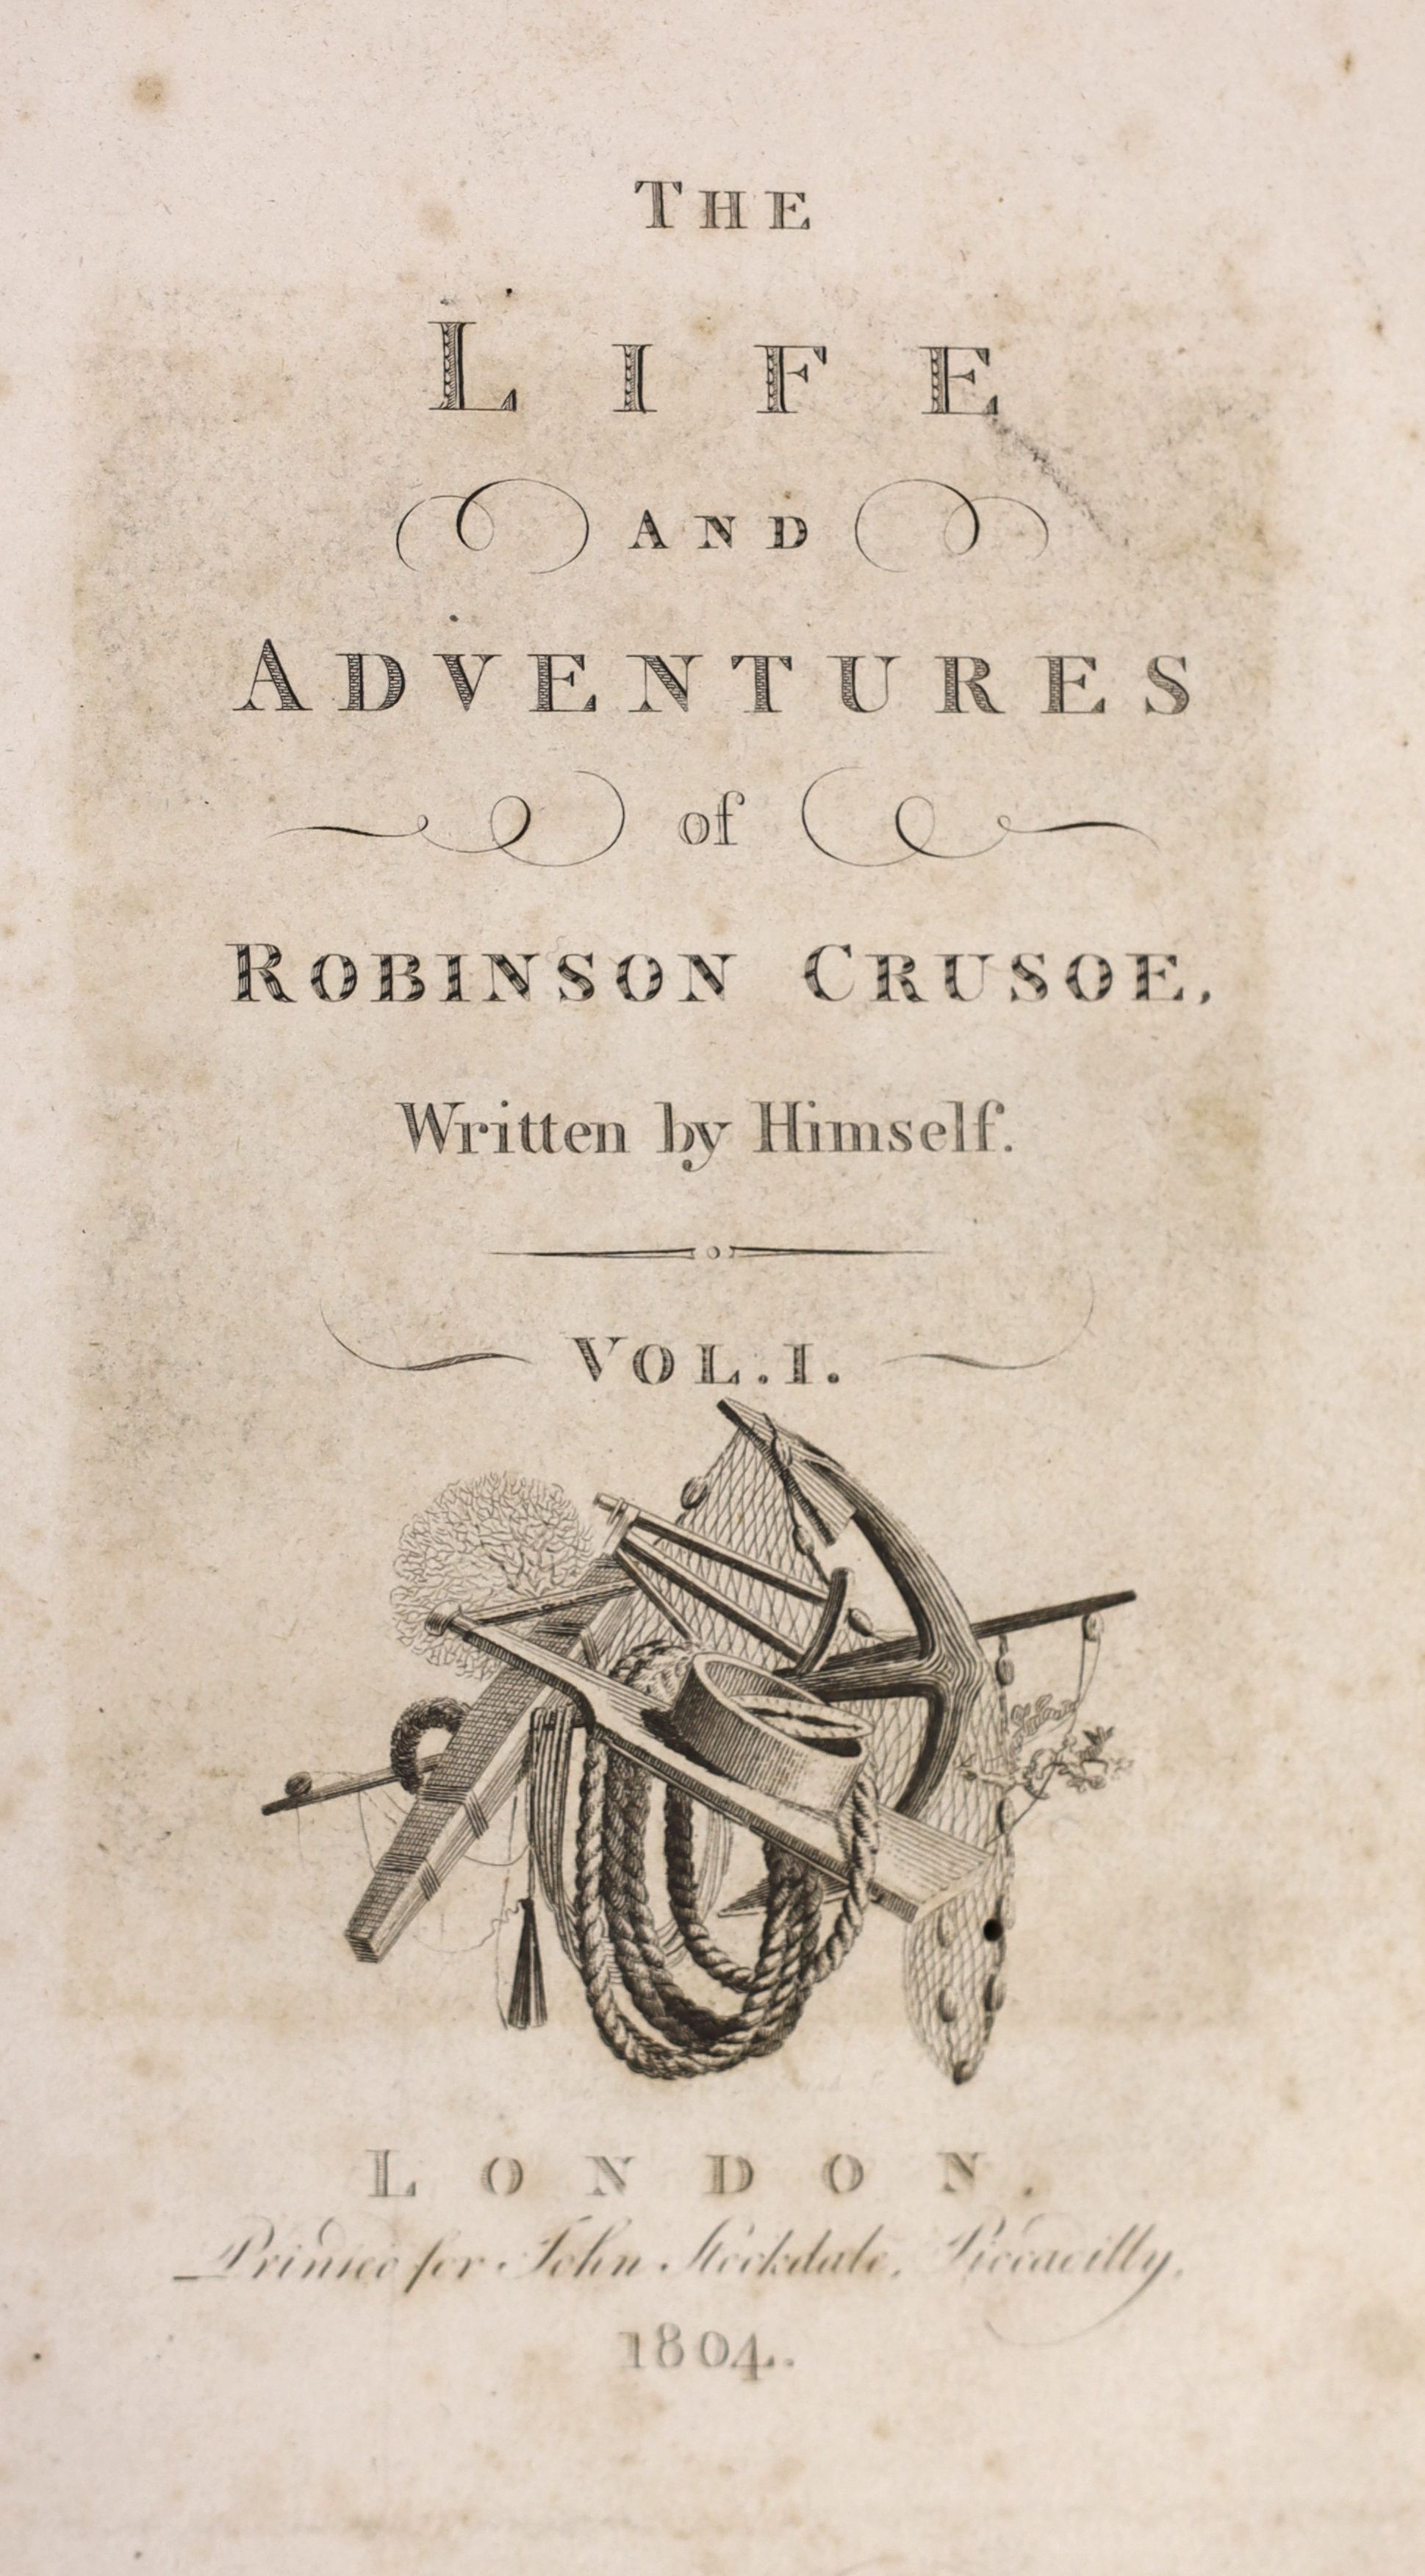 Defoe, Daniel - Robinson Crusoe, illustrated by Medland after Stothard, parts 1 & 2 only in 2 vols, 8vo, half calf, with 2 frontises, 2 engraved titles and 15 plates, occasional spotting throughout, London, 1804